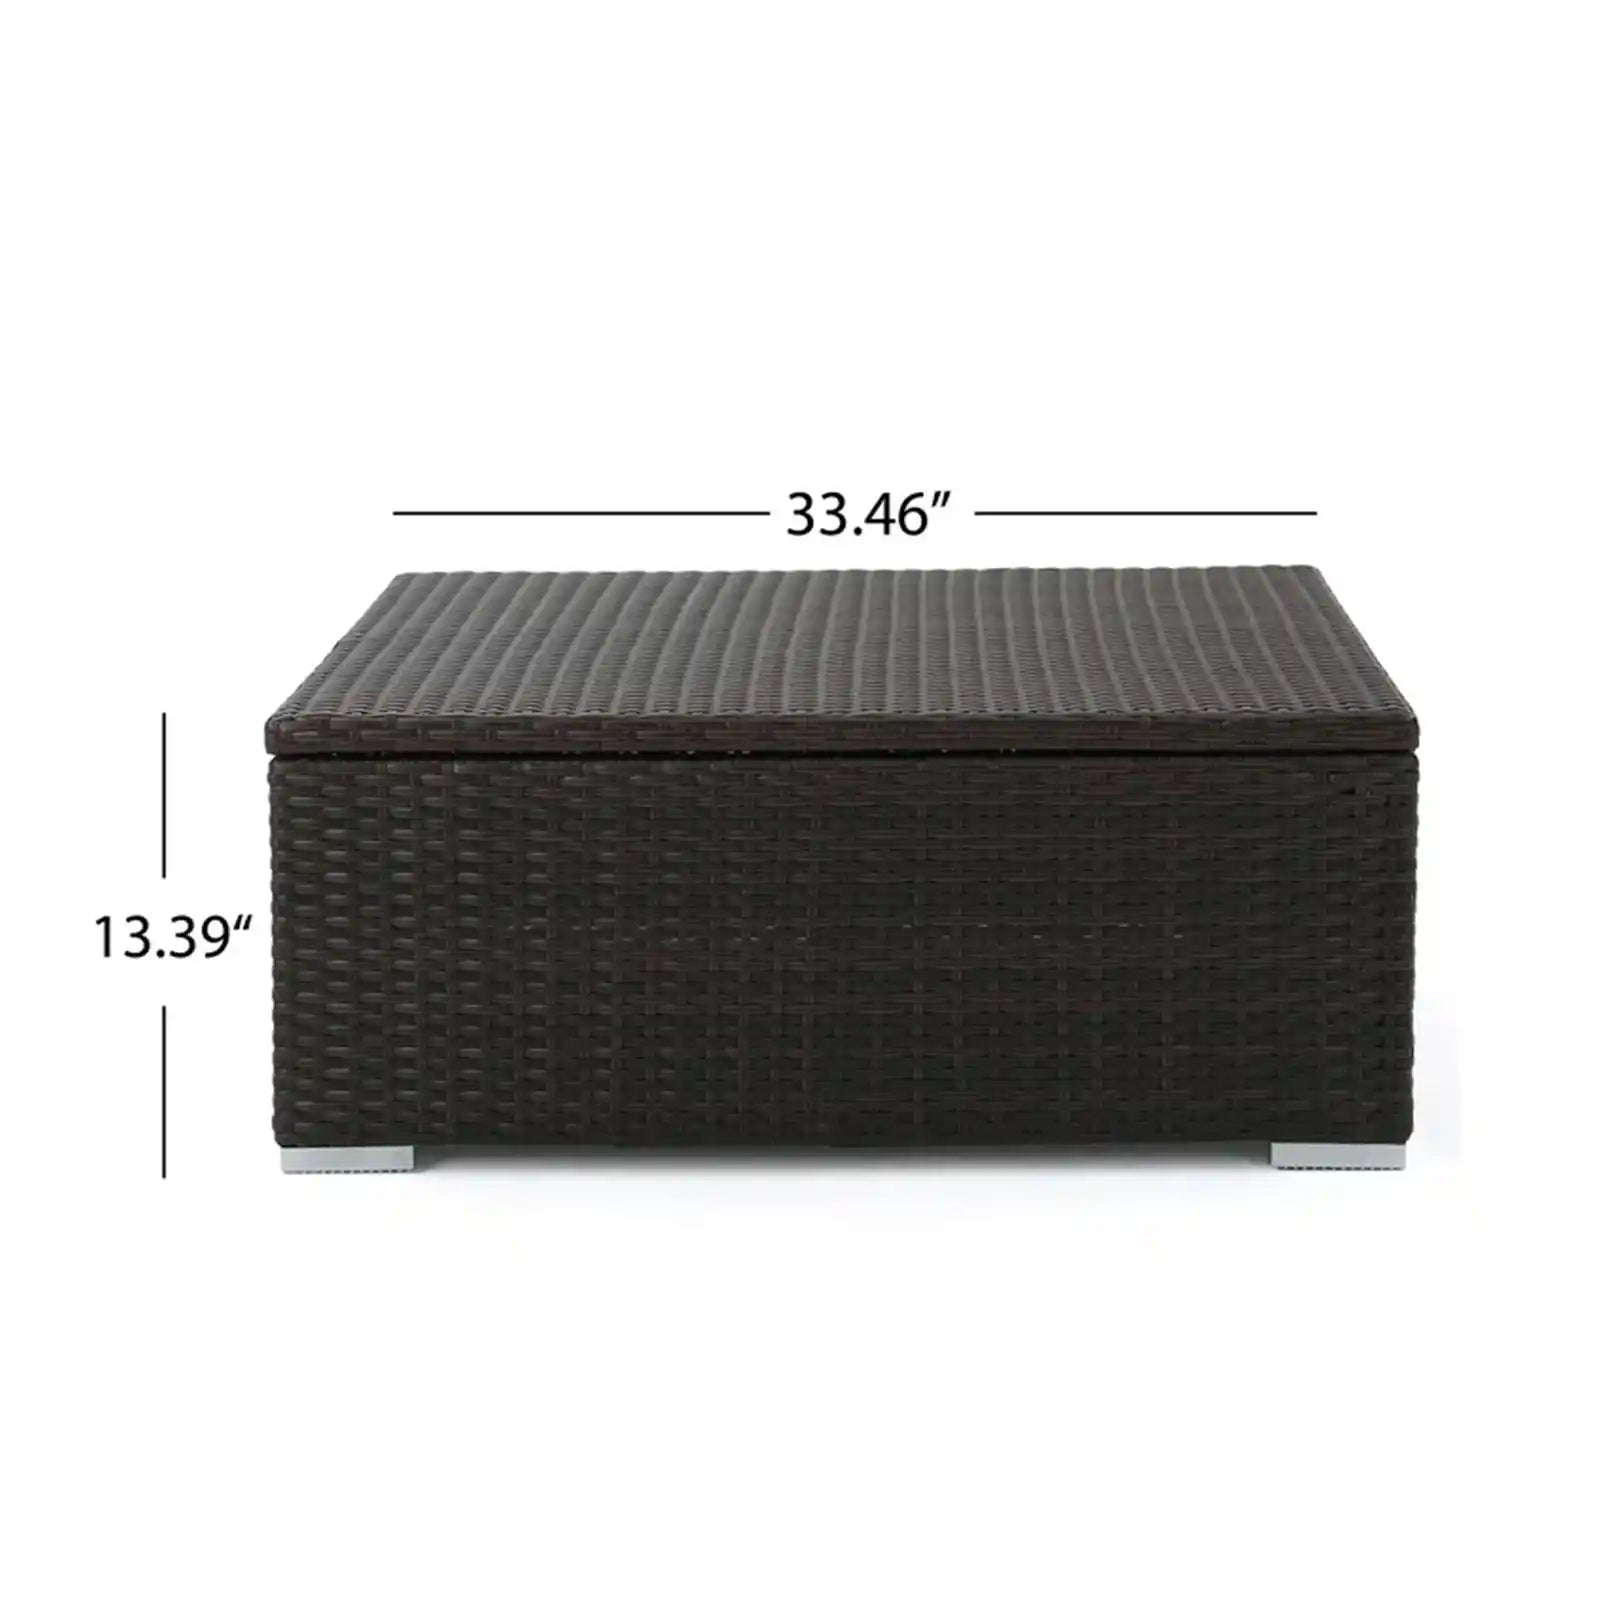 Outdoor Wicker Coffee Table with Storage, Multibrown